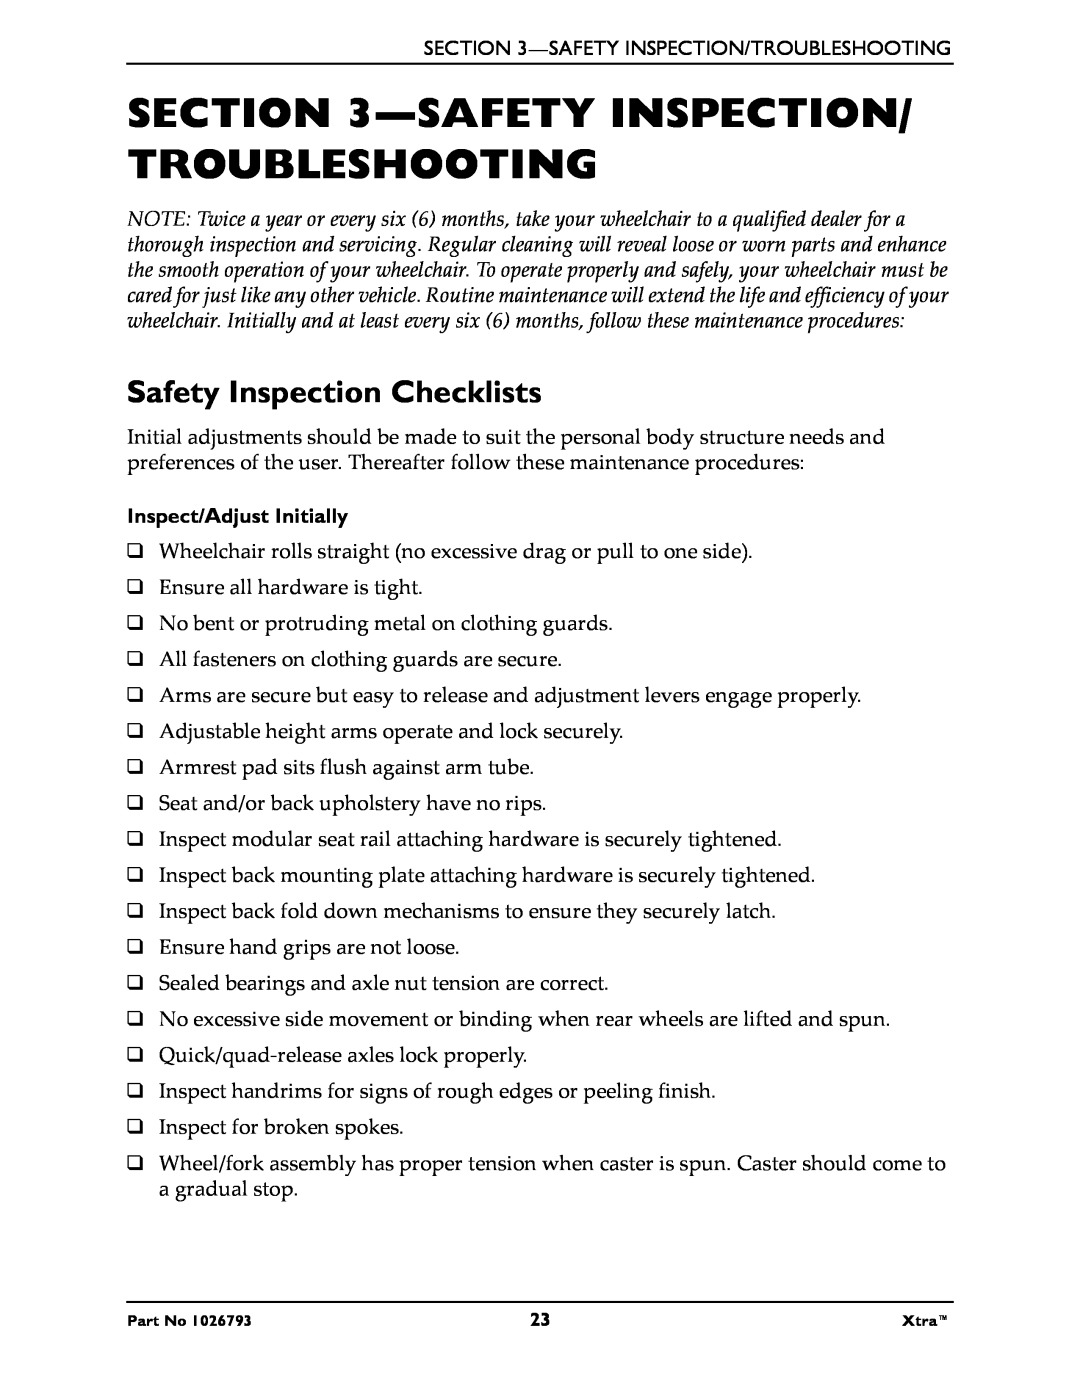 Invacare 1026793 manual Safety Inspection/ Troubleshooting, Safety Inspection Checklists 